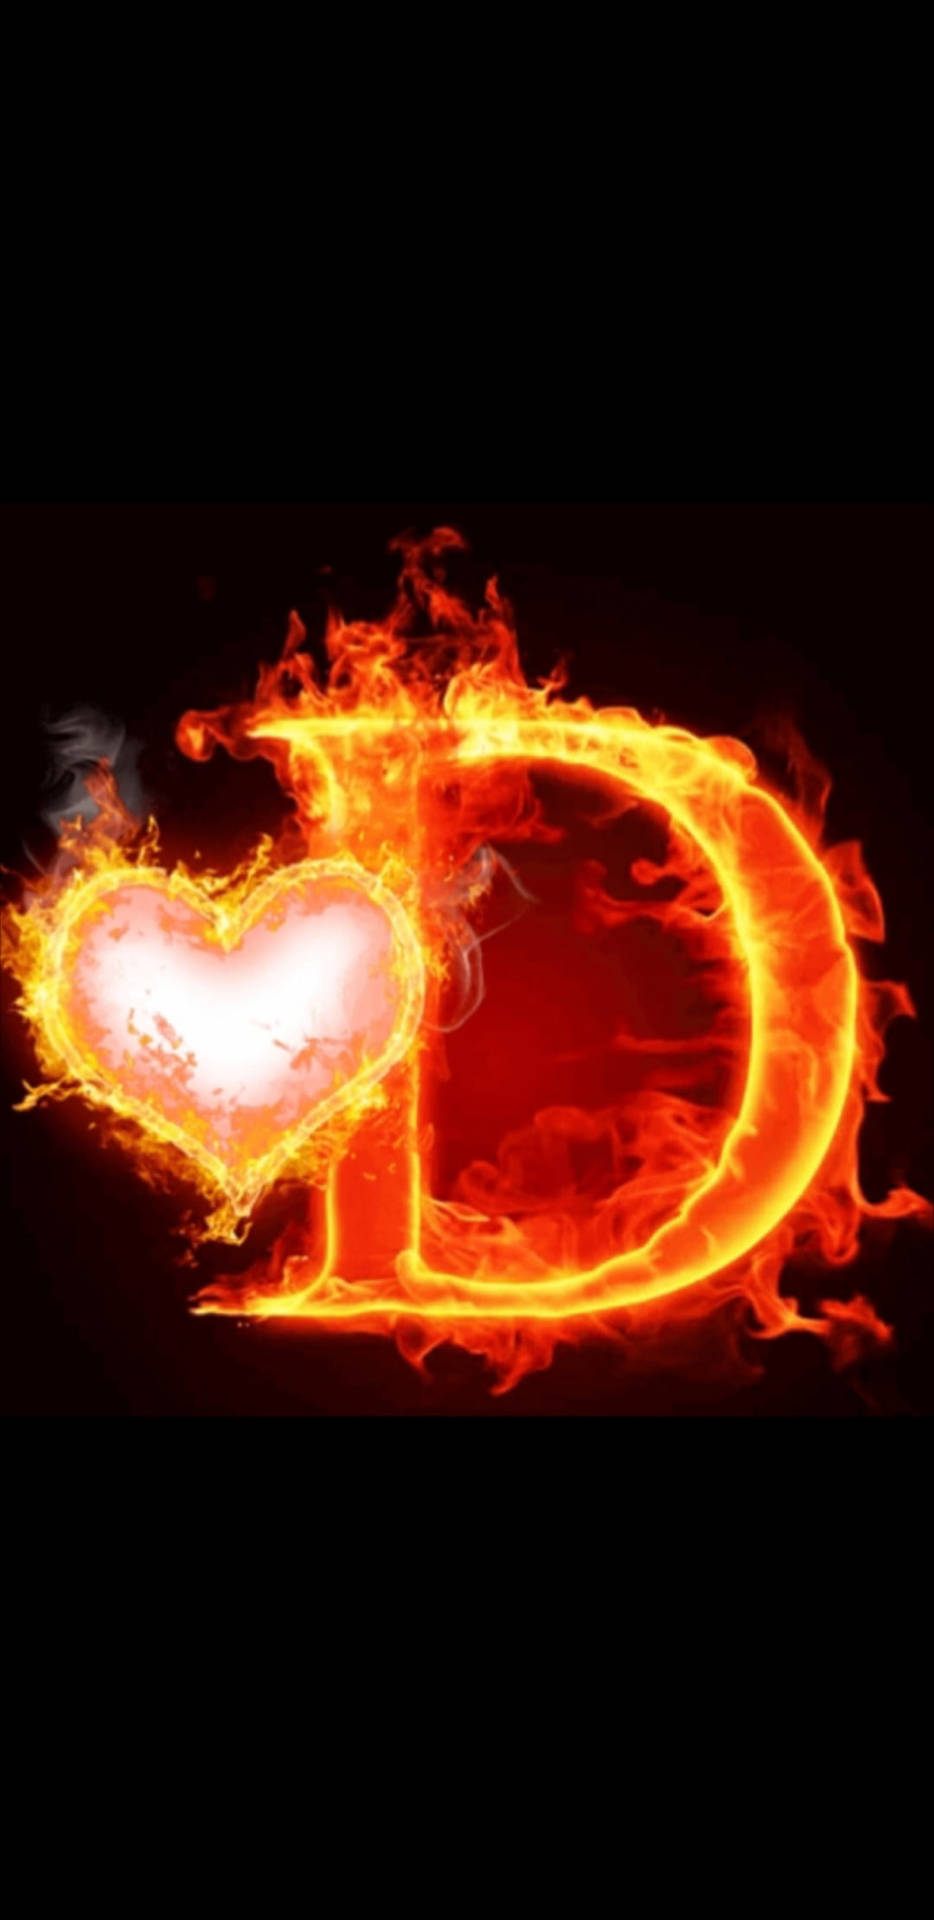 Burning Heart With Letter D